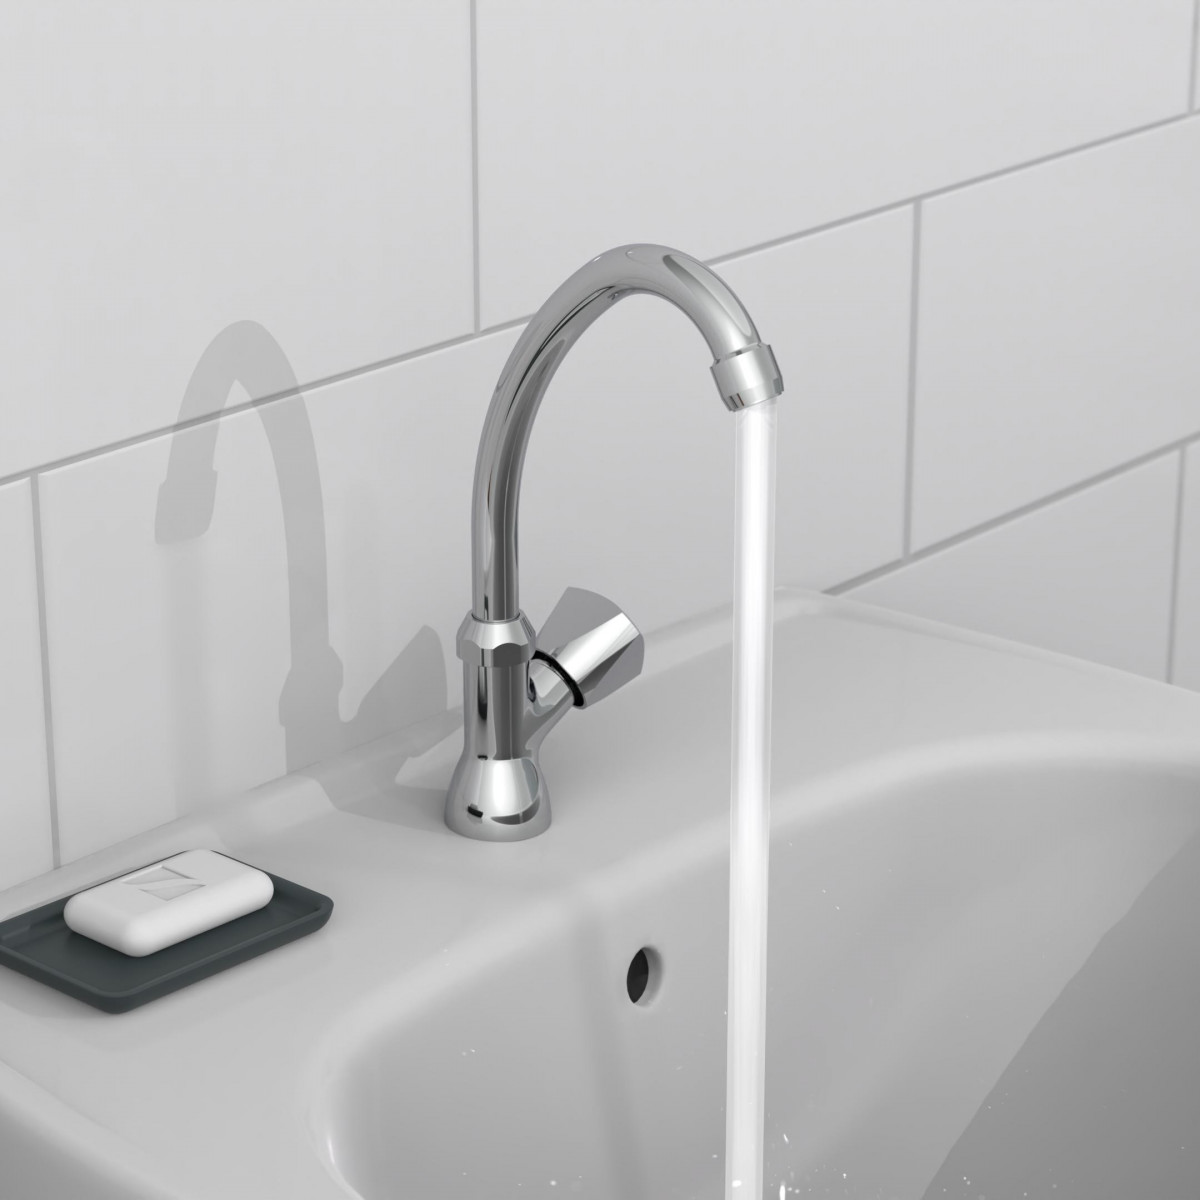 CARNEO Cold water swivel tap, chrome